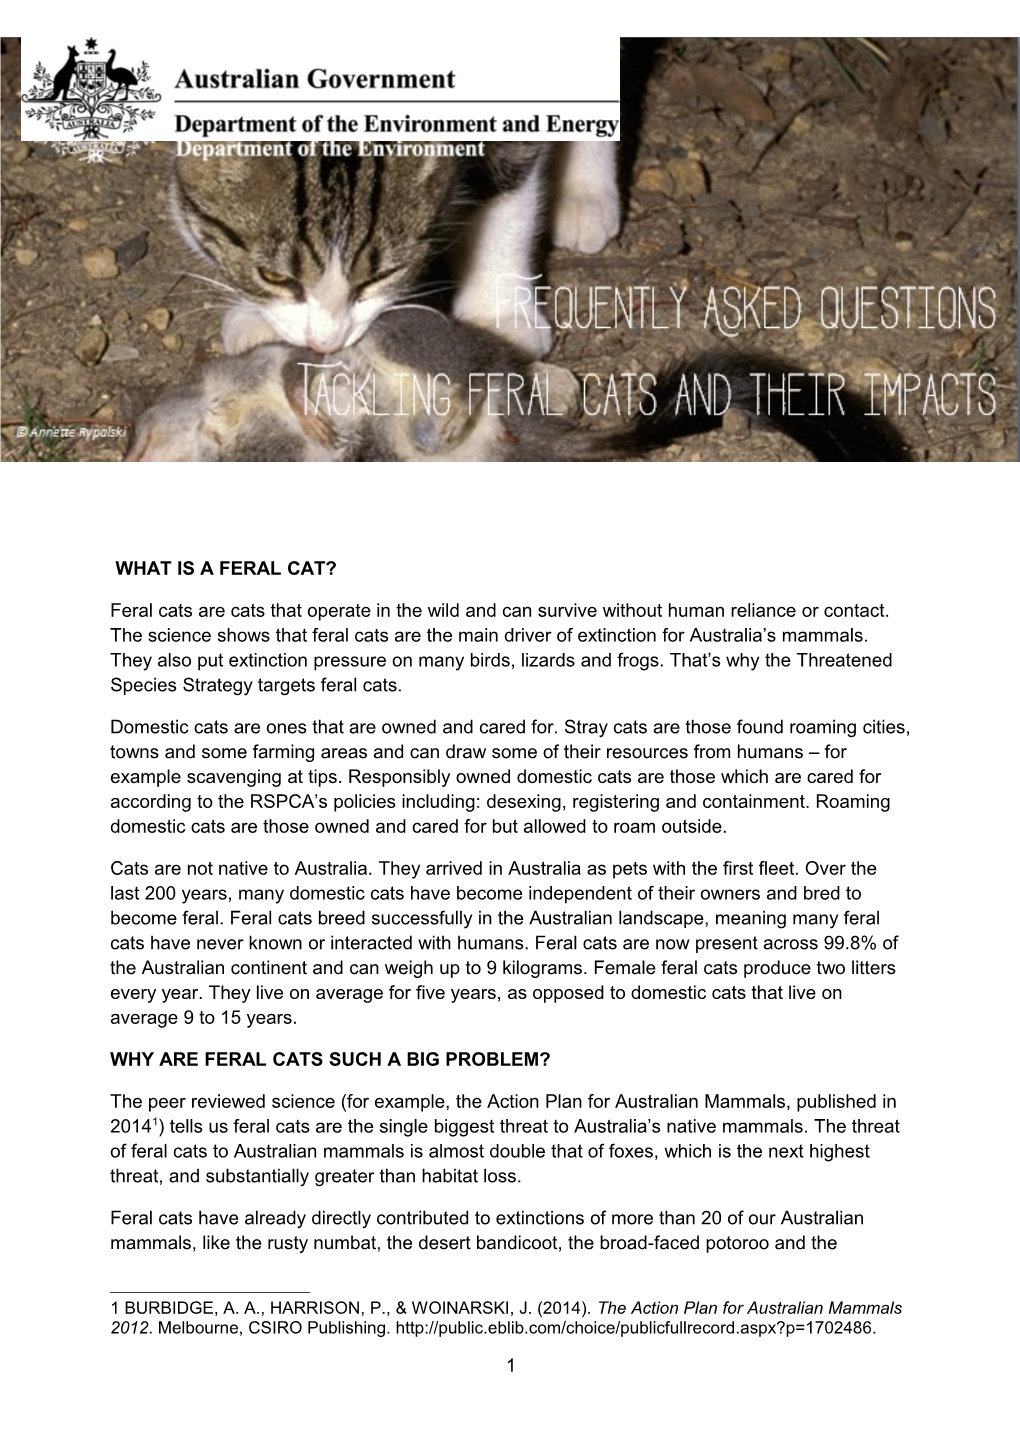 Tackling Feral Cats and Their Impacts - Frequently Asked Questions